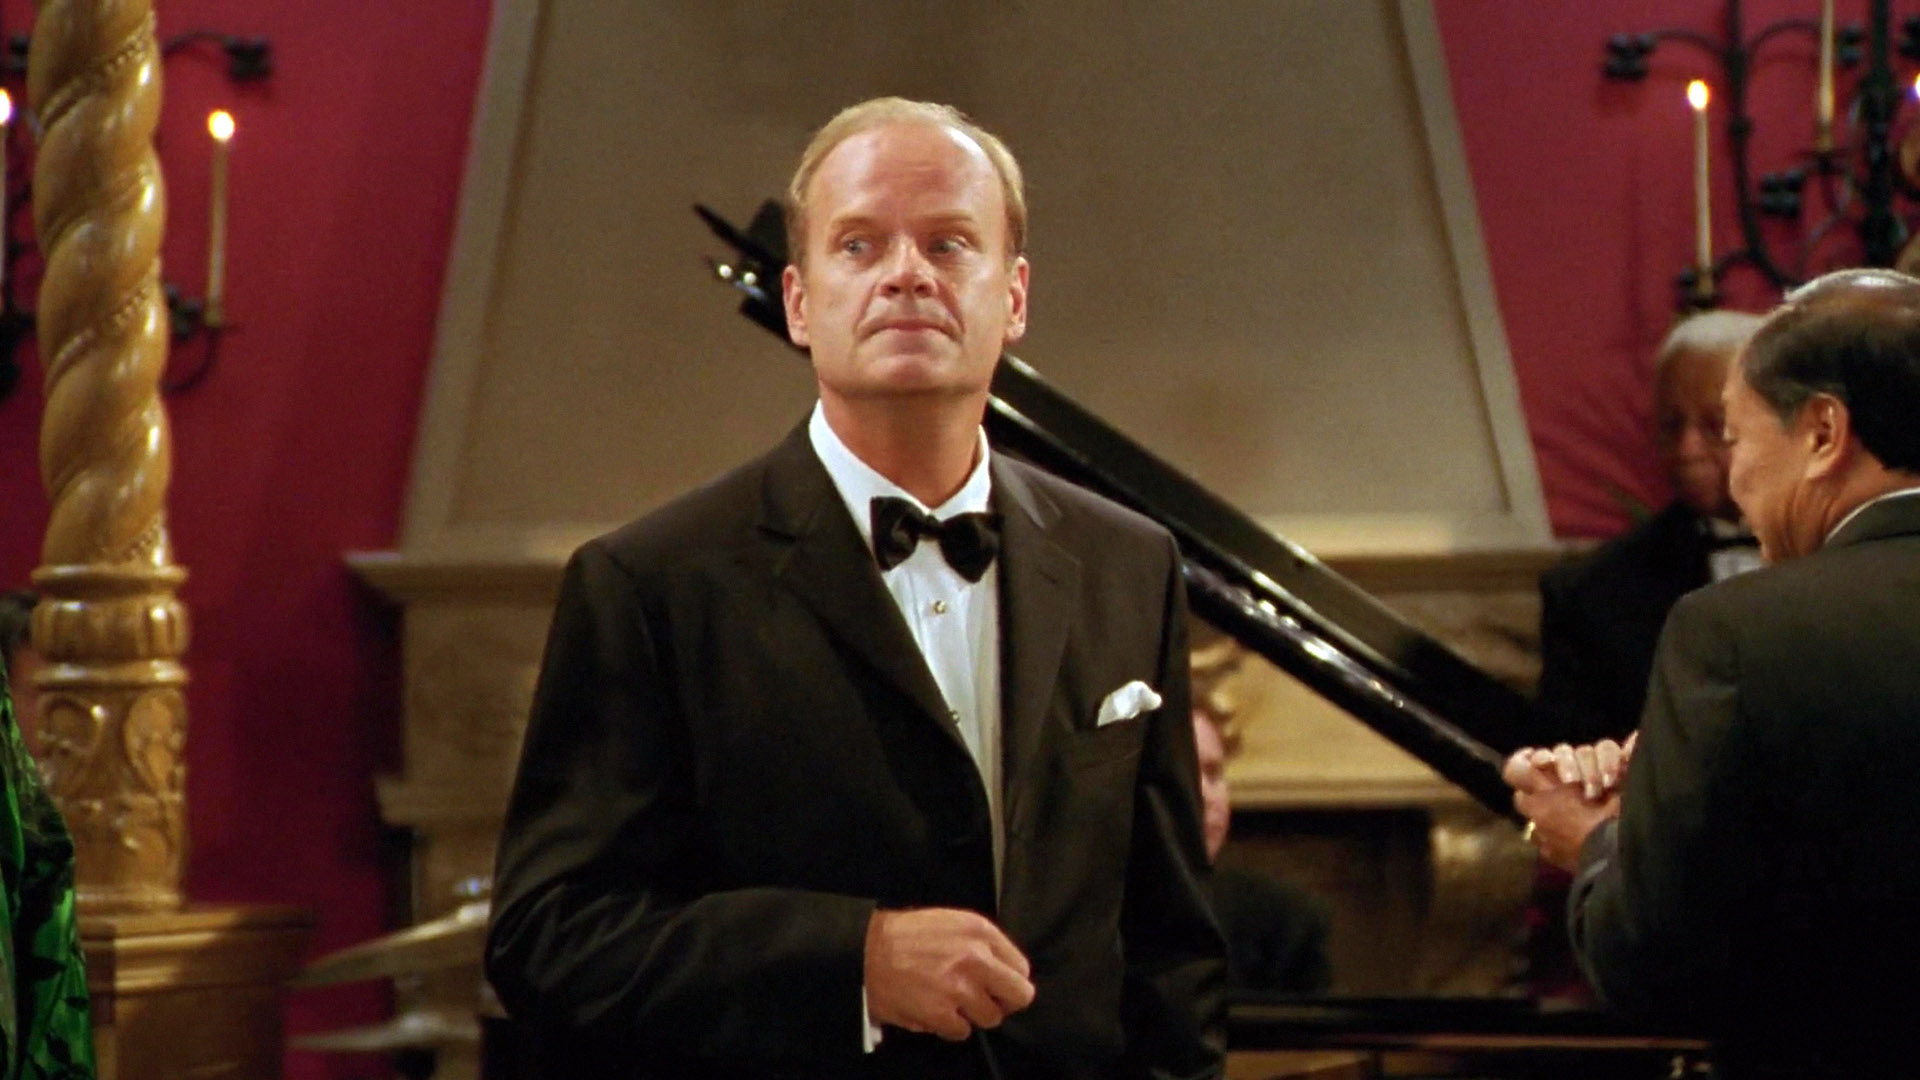 Top 7 Classic Frasier Episodes Ranked by Their IMDb Score